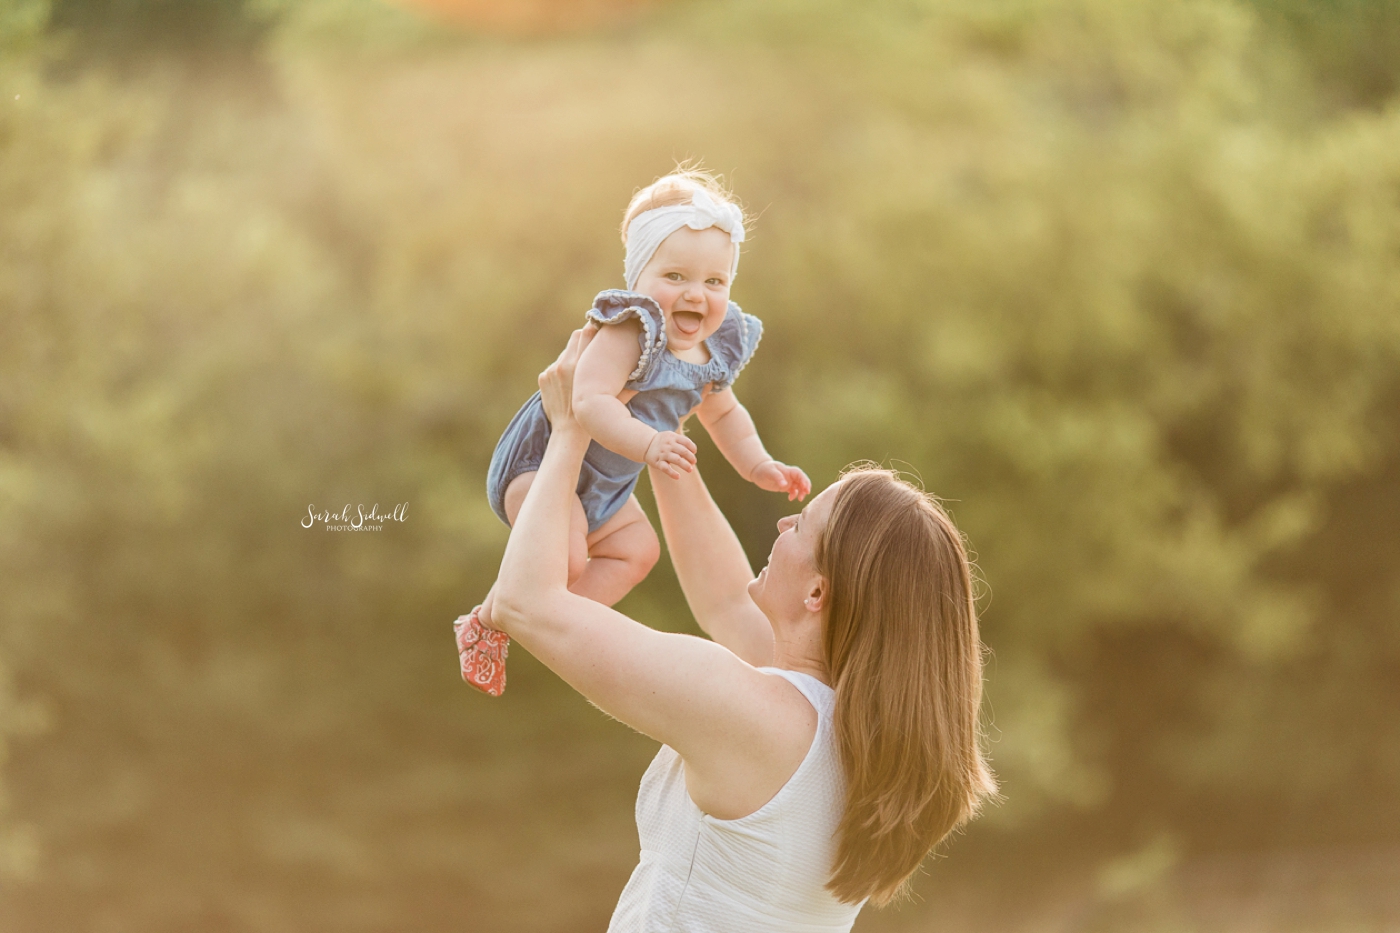 Six Month Milestone Session | Sarah Sidwell Photography